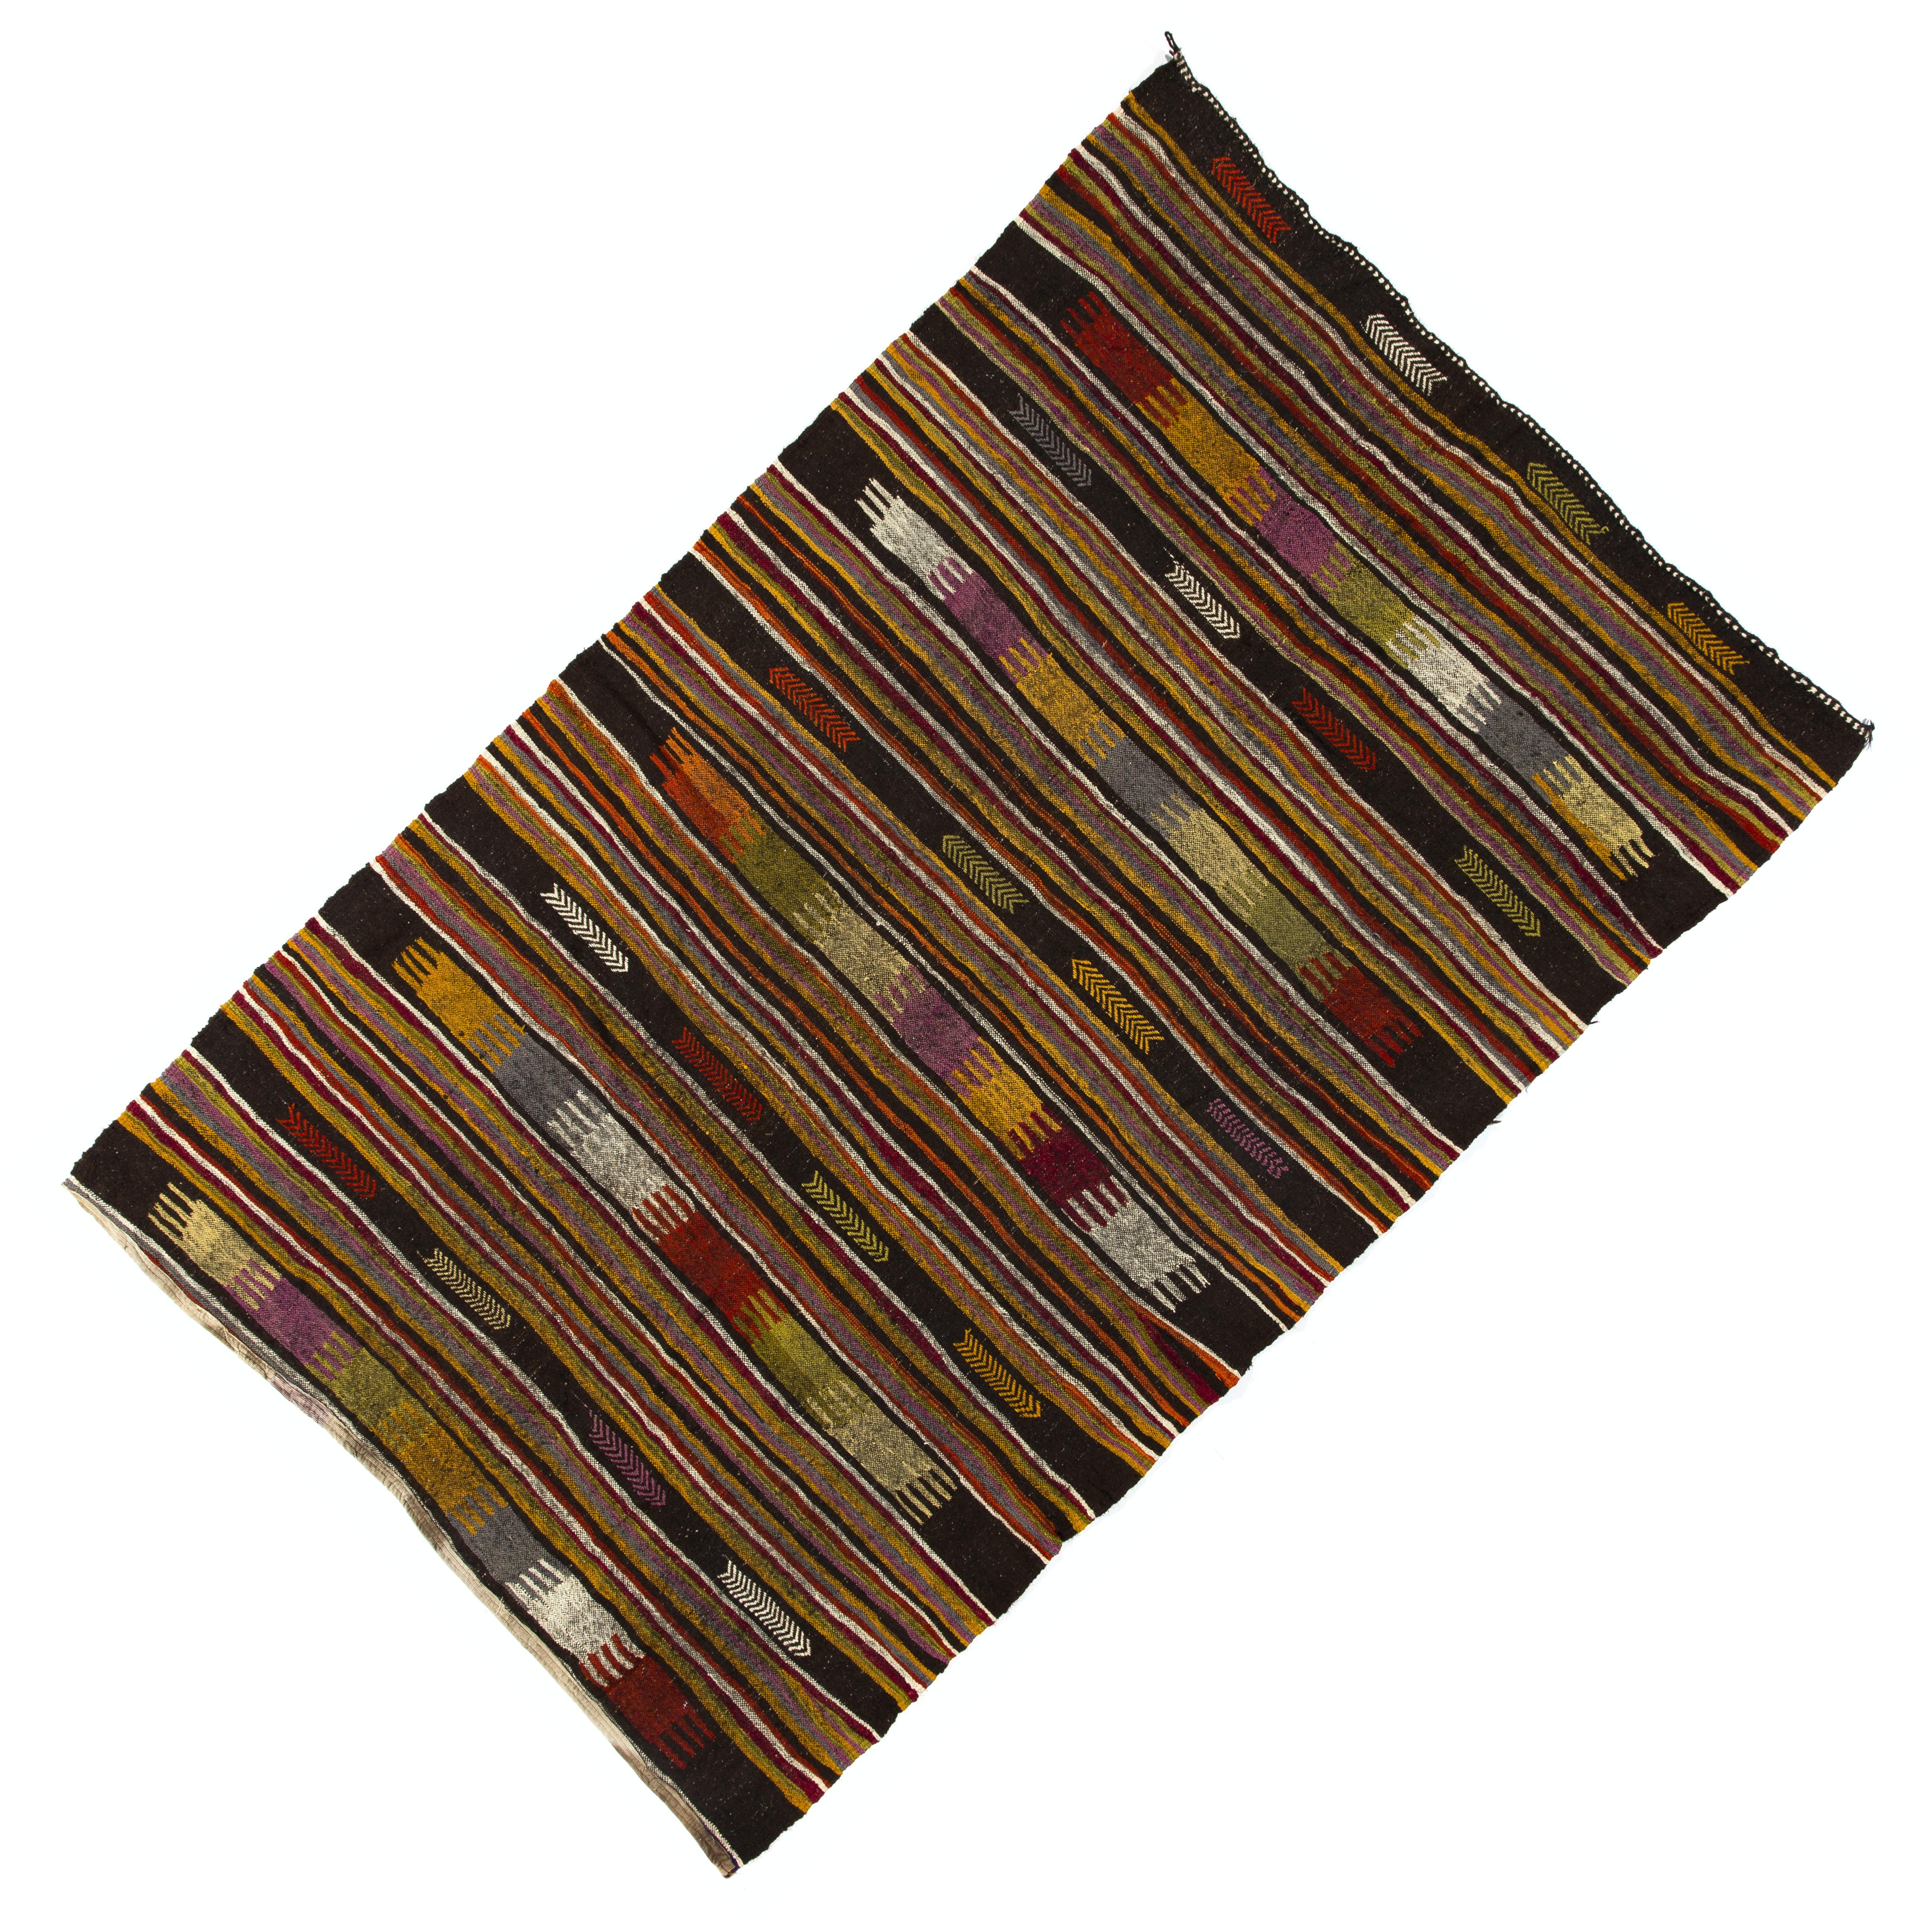 20th Century 5.8x9 Ft Vintage Hand-Woven Central Anatolian Kilim Rug with Striped Design For Sale